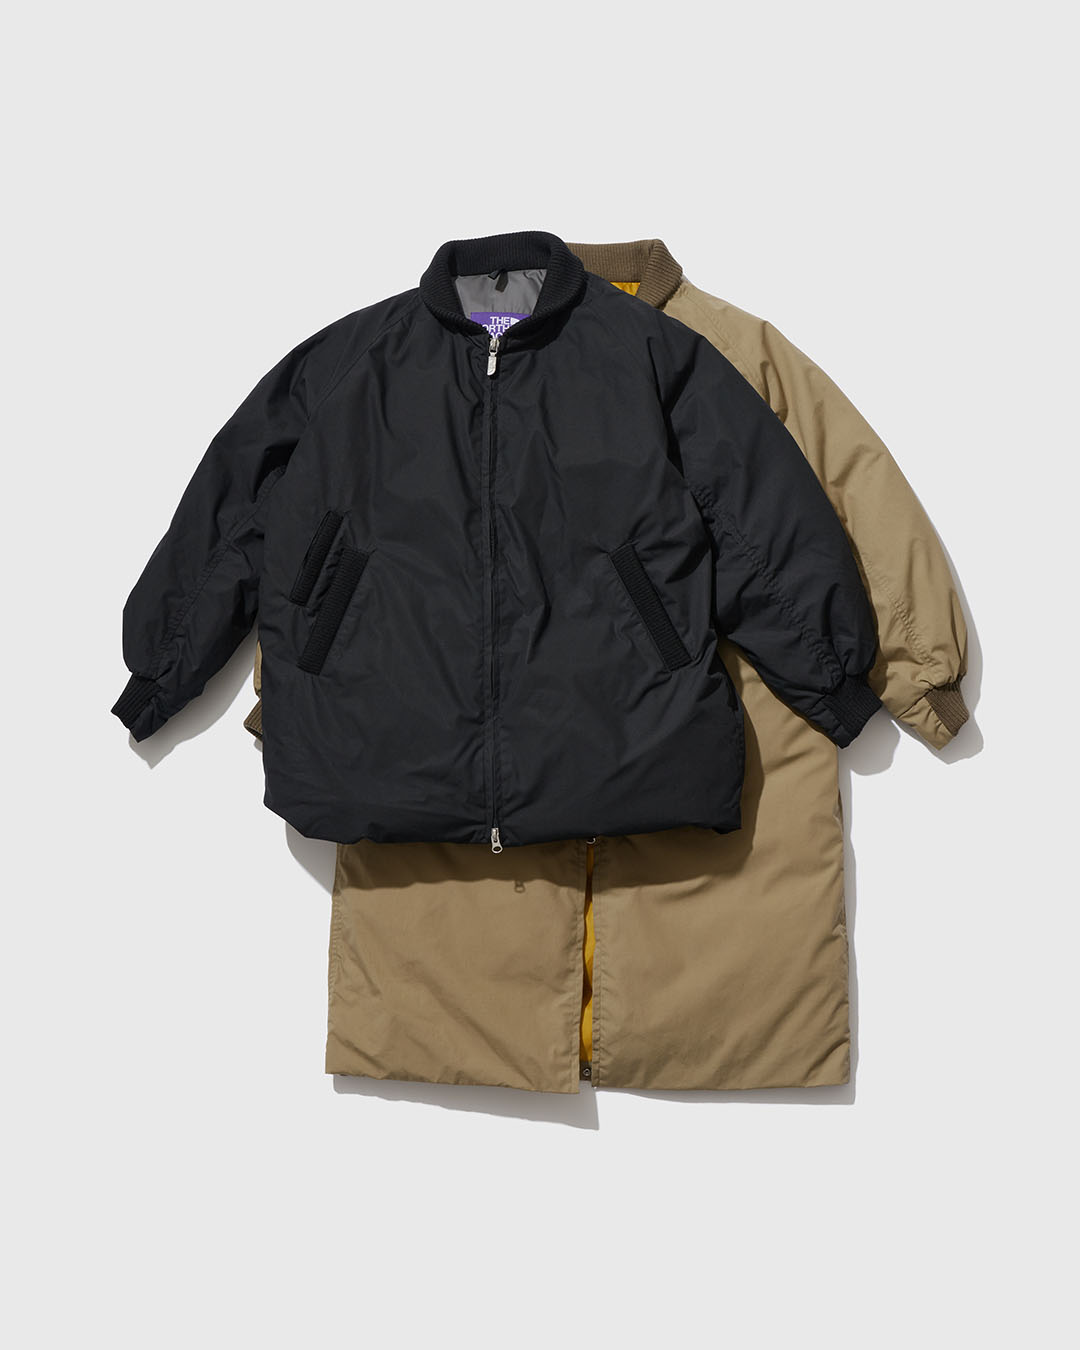 nanamica / THE NORTH FACE PURPLE LABEL / Featured Product vol.61